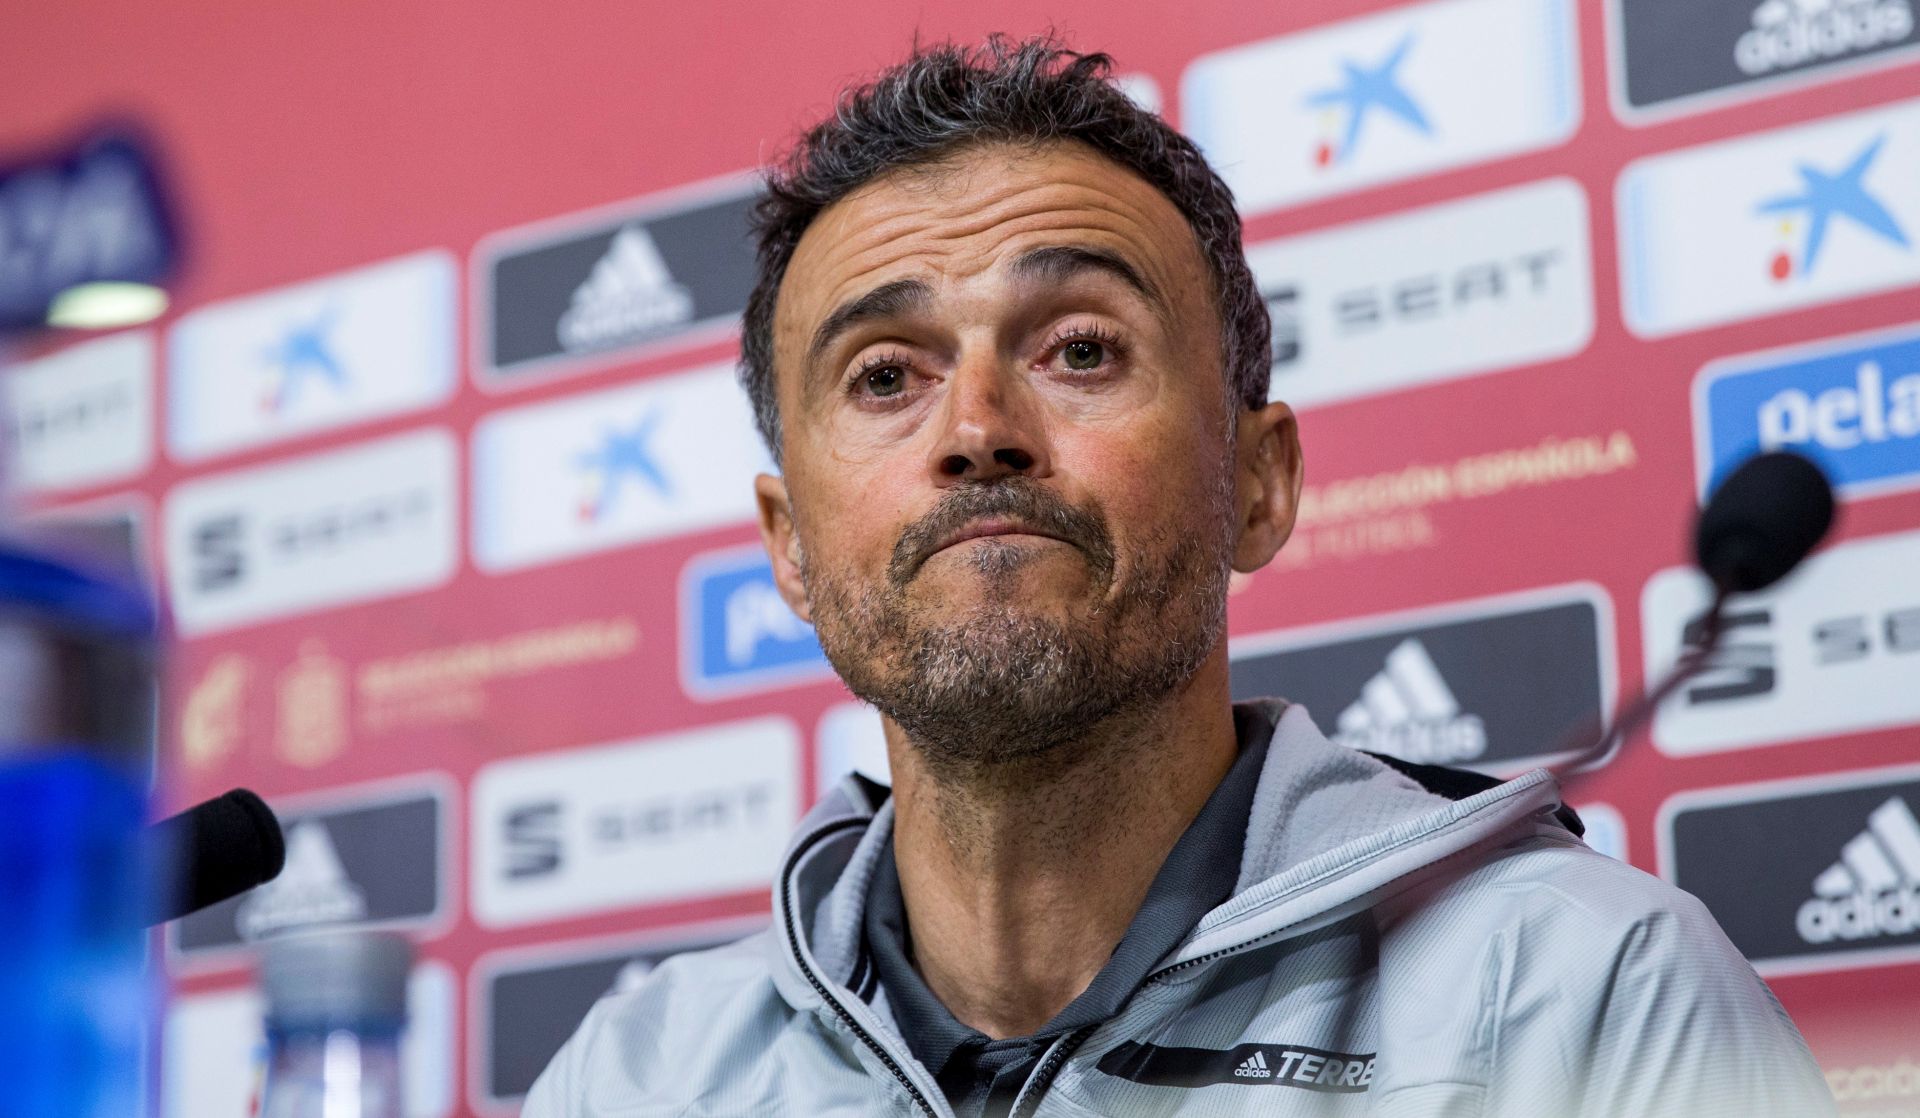 epa07150662 Spain's national soccer team head coach, Luis Enrique, offers a press conference to announce Spains' squad for the upcoming matches against Croatia and Bosnia-Herzegovina at Las Rozas Sports City in Madrid, Spain, 08 November 2018. Spain will play the UEFA Nations League match against Croatia on 15 November 2018 and a friendly match against Bosnia-Herzegovina on 18 November 2018.  EPA/Rodrigo Jimenez